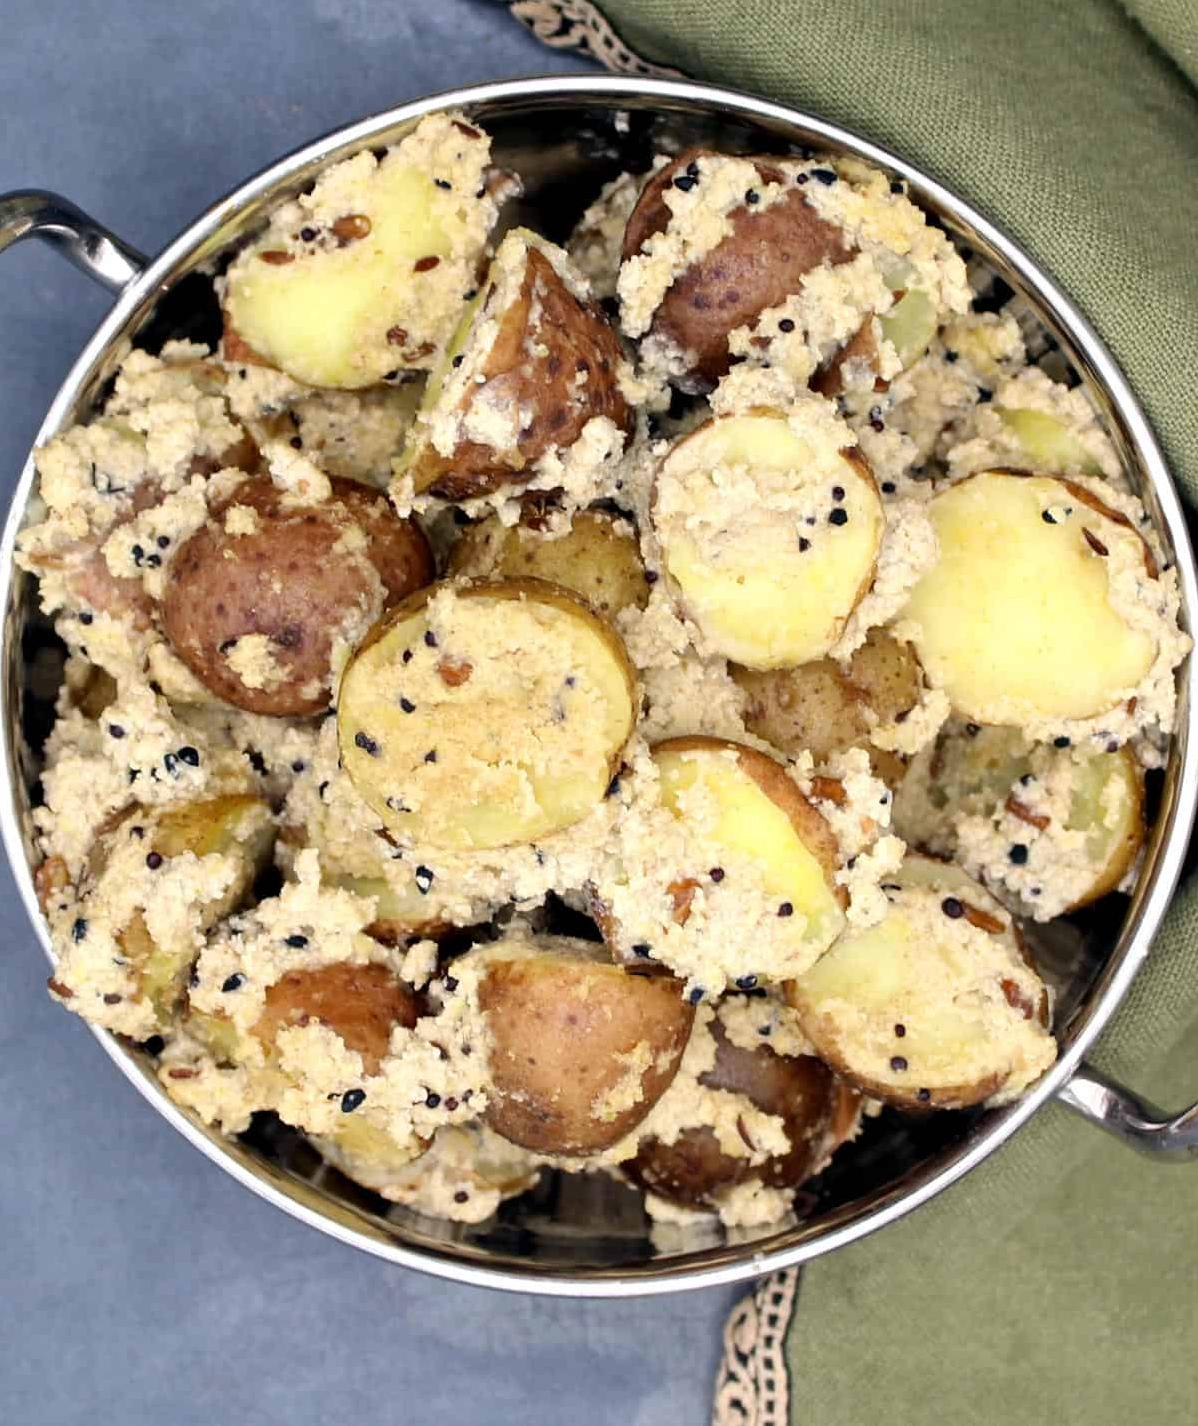  These golden, crispy potatoes are perfectly coated in a rich poppy seed sauce.